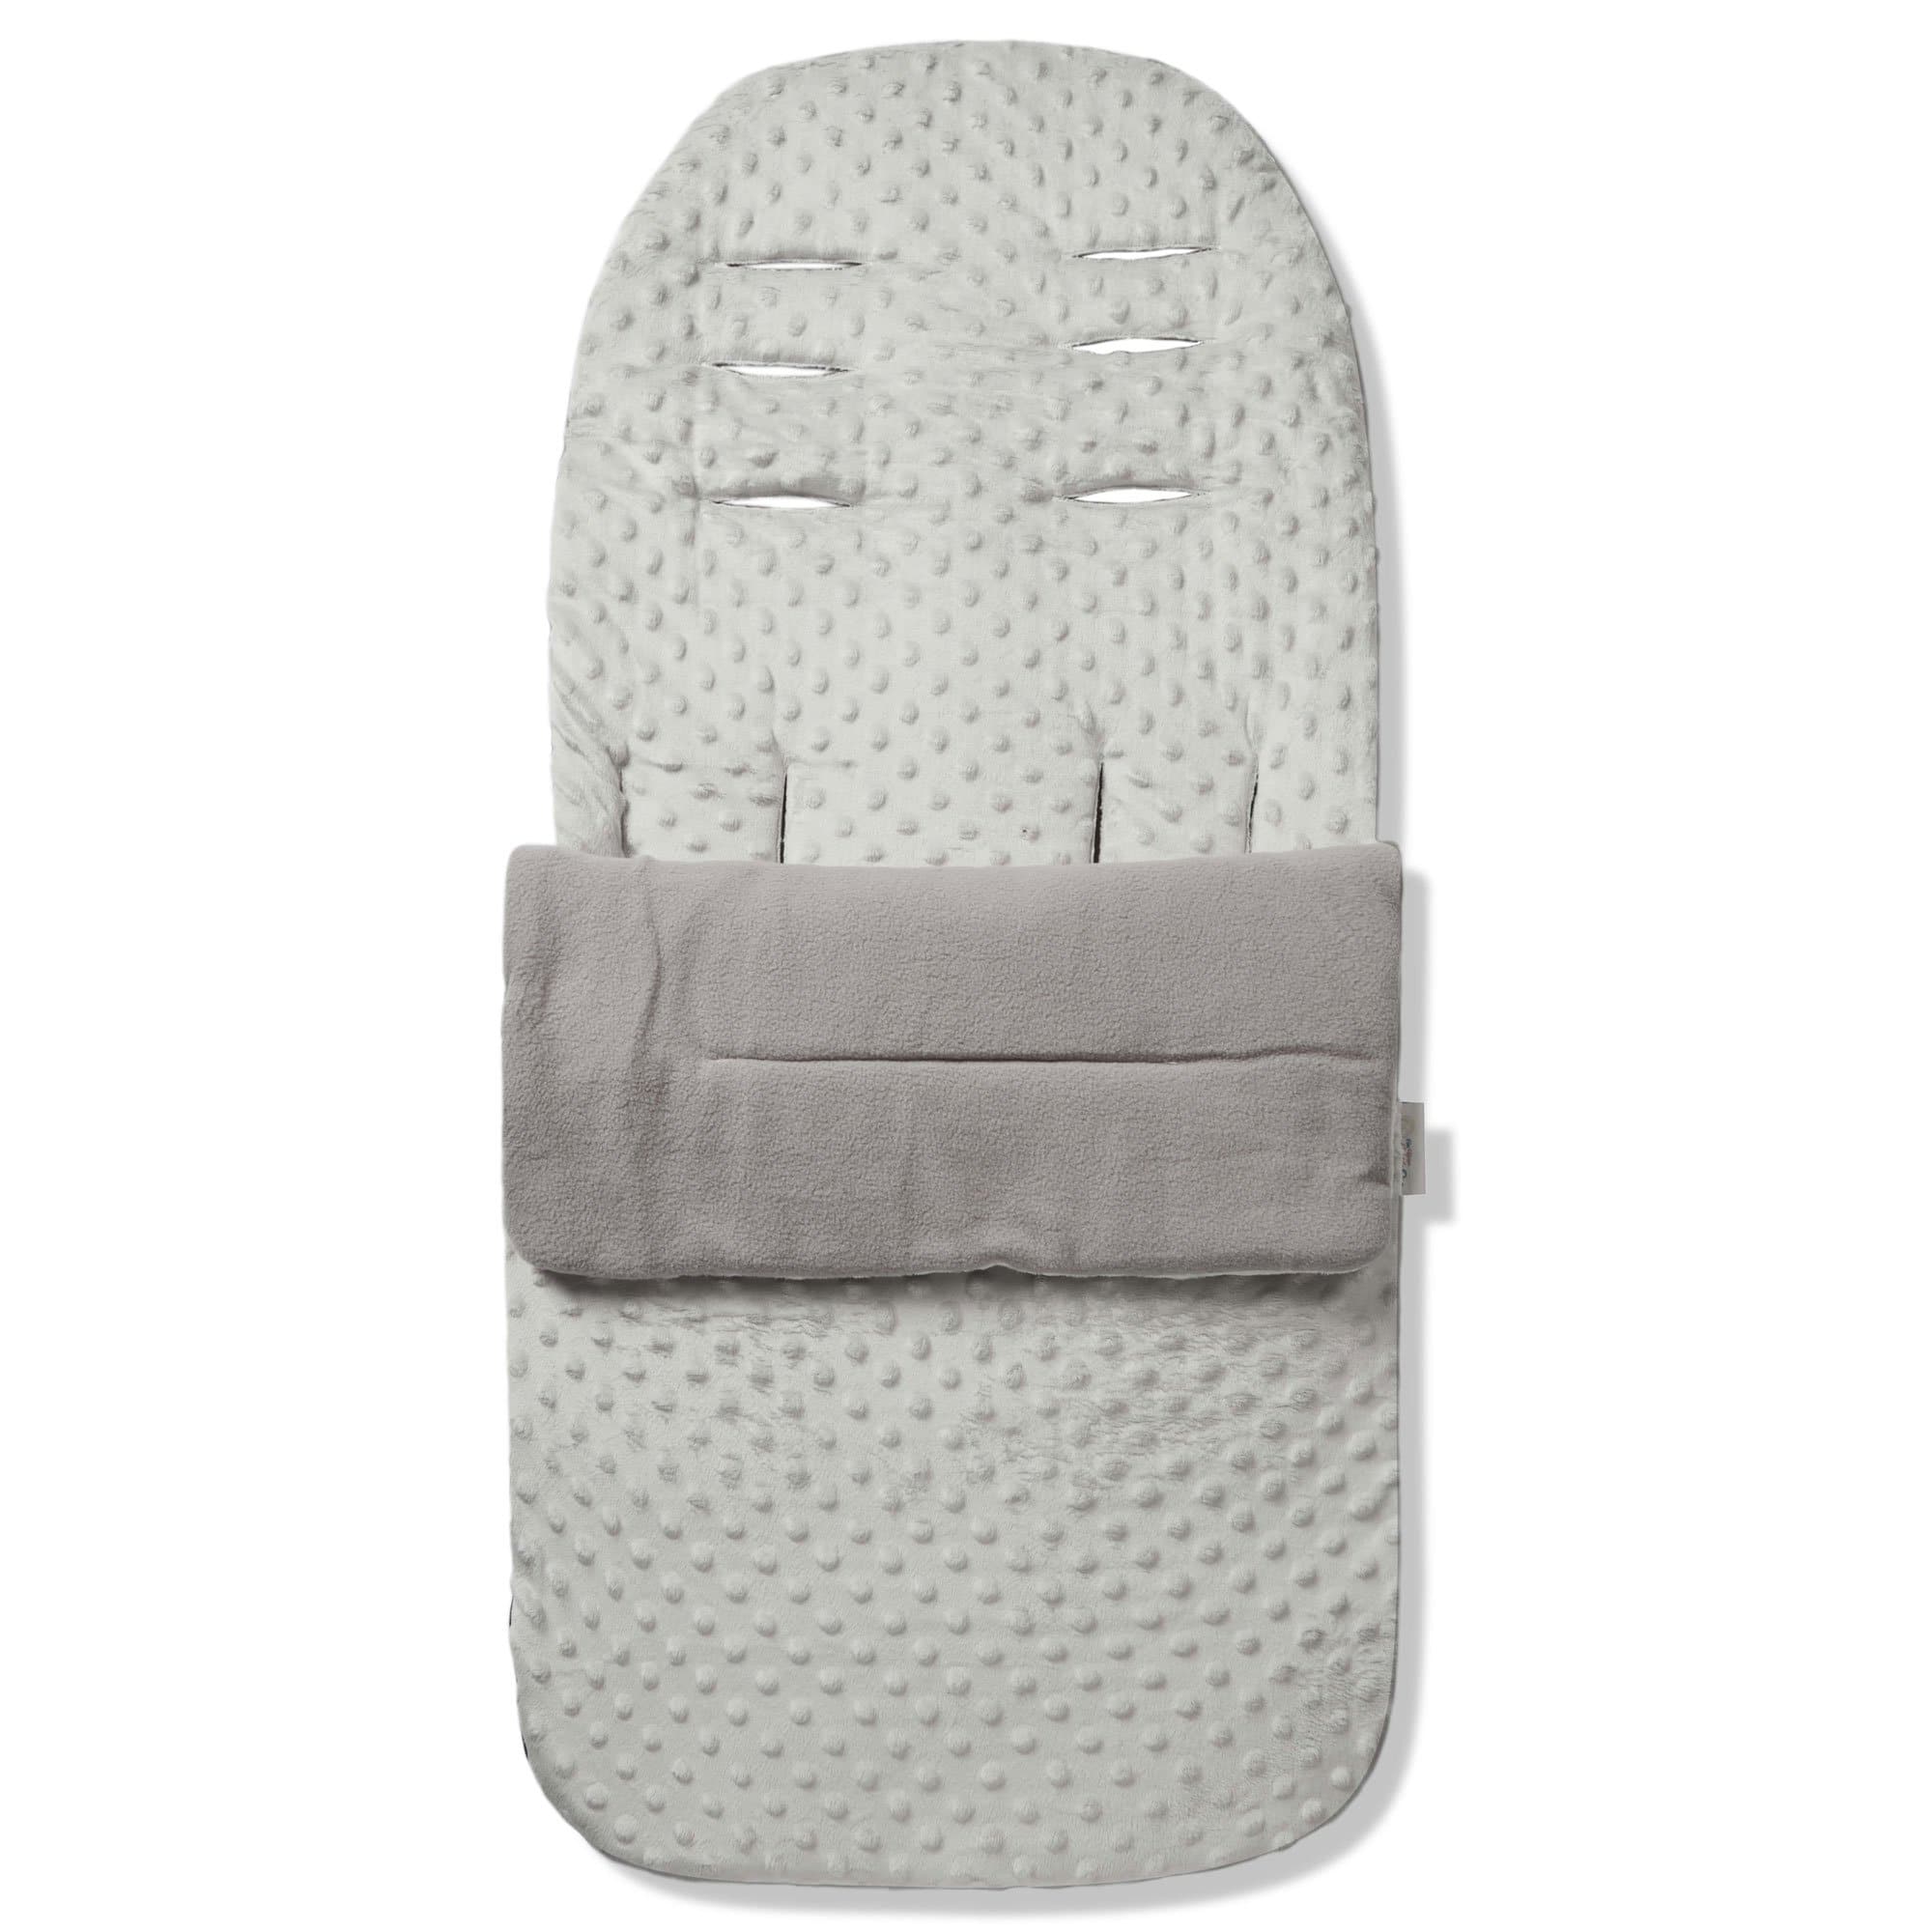 Dimple Footmuff / Cosy Toes Compatible with Formula - Grey / Fits All Models | For Your Little One